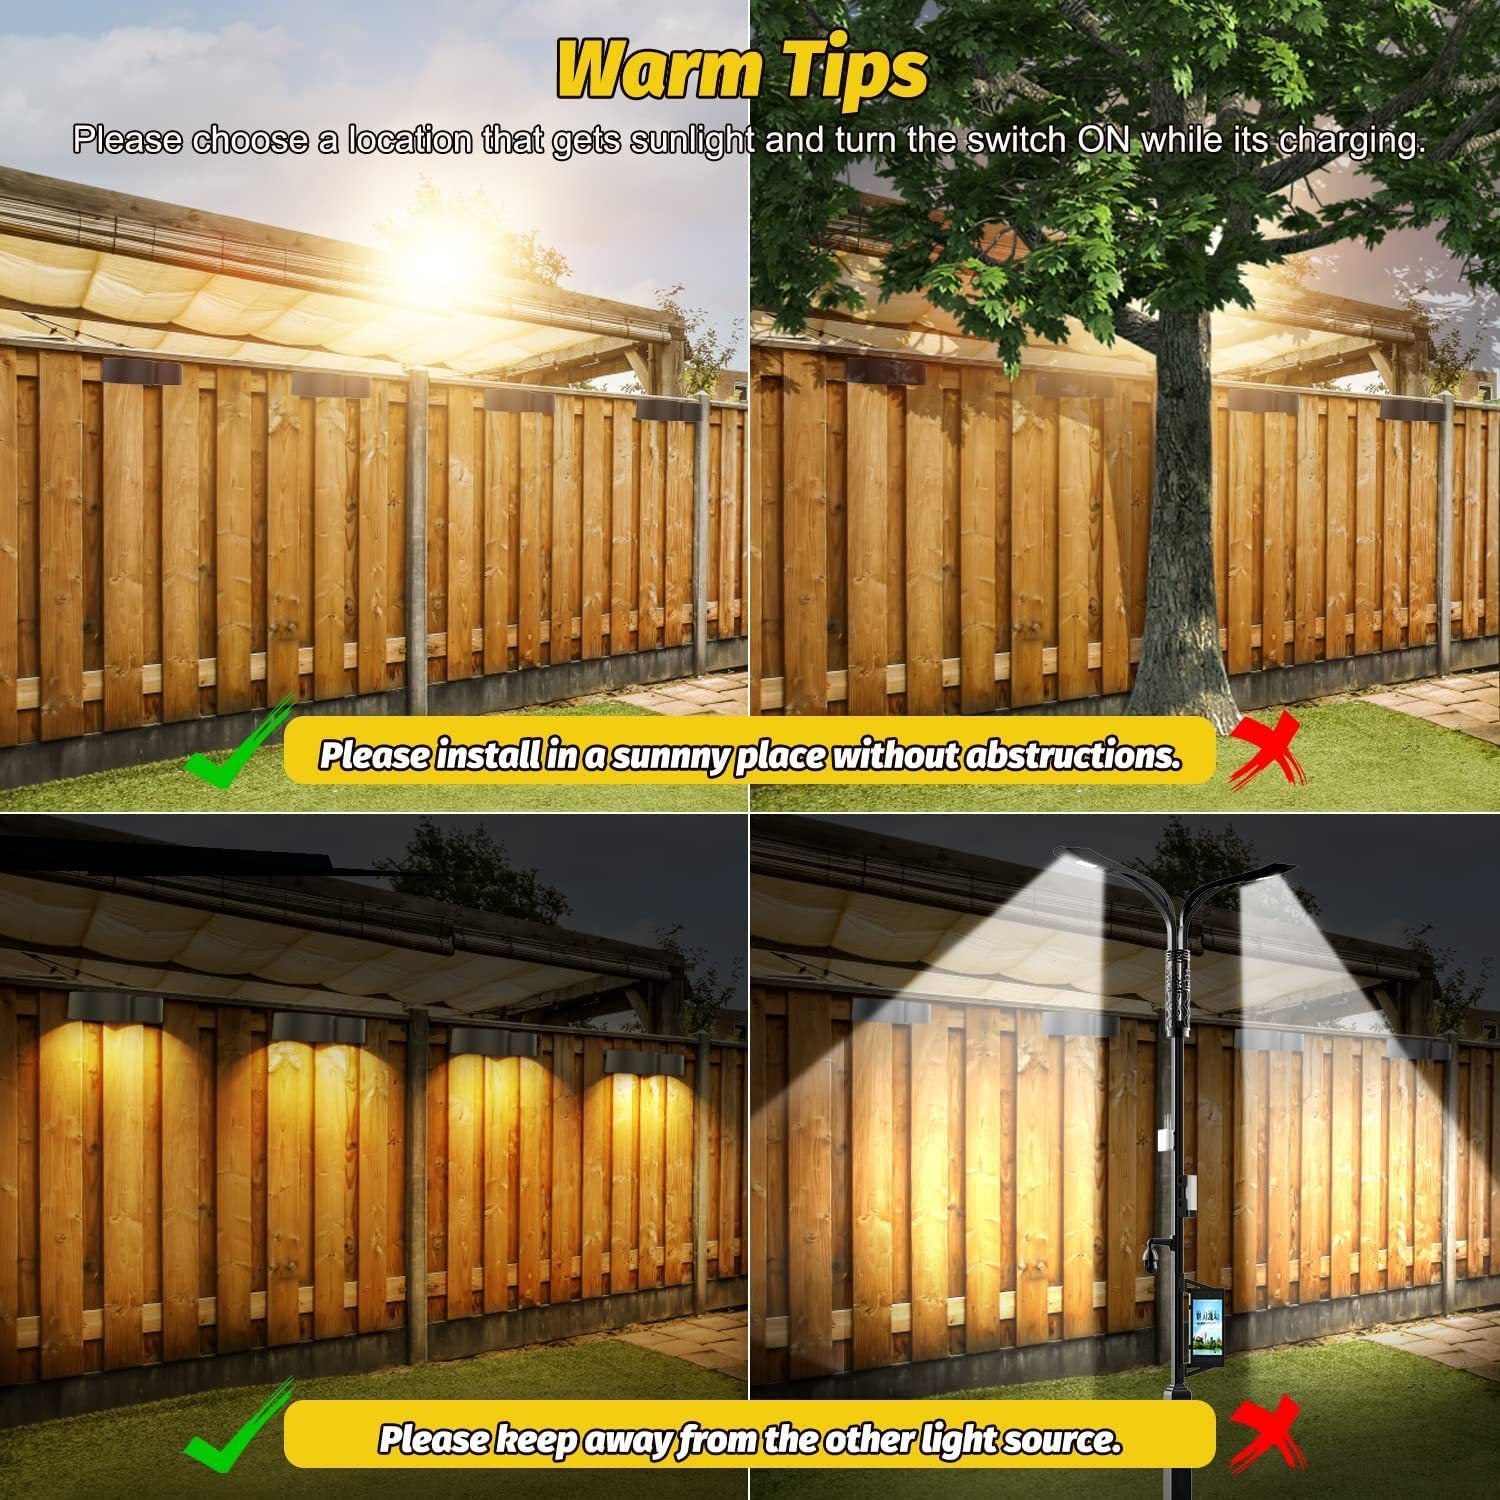 Solar Fence Lights  Outdoor Wall Lights Waterproof IP65, Warm White & RGB 8 Specific Fixed Colors for Fence Wall Step Deck Patio